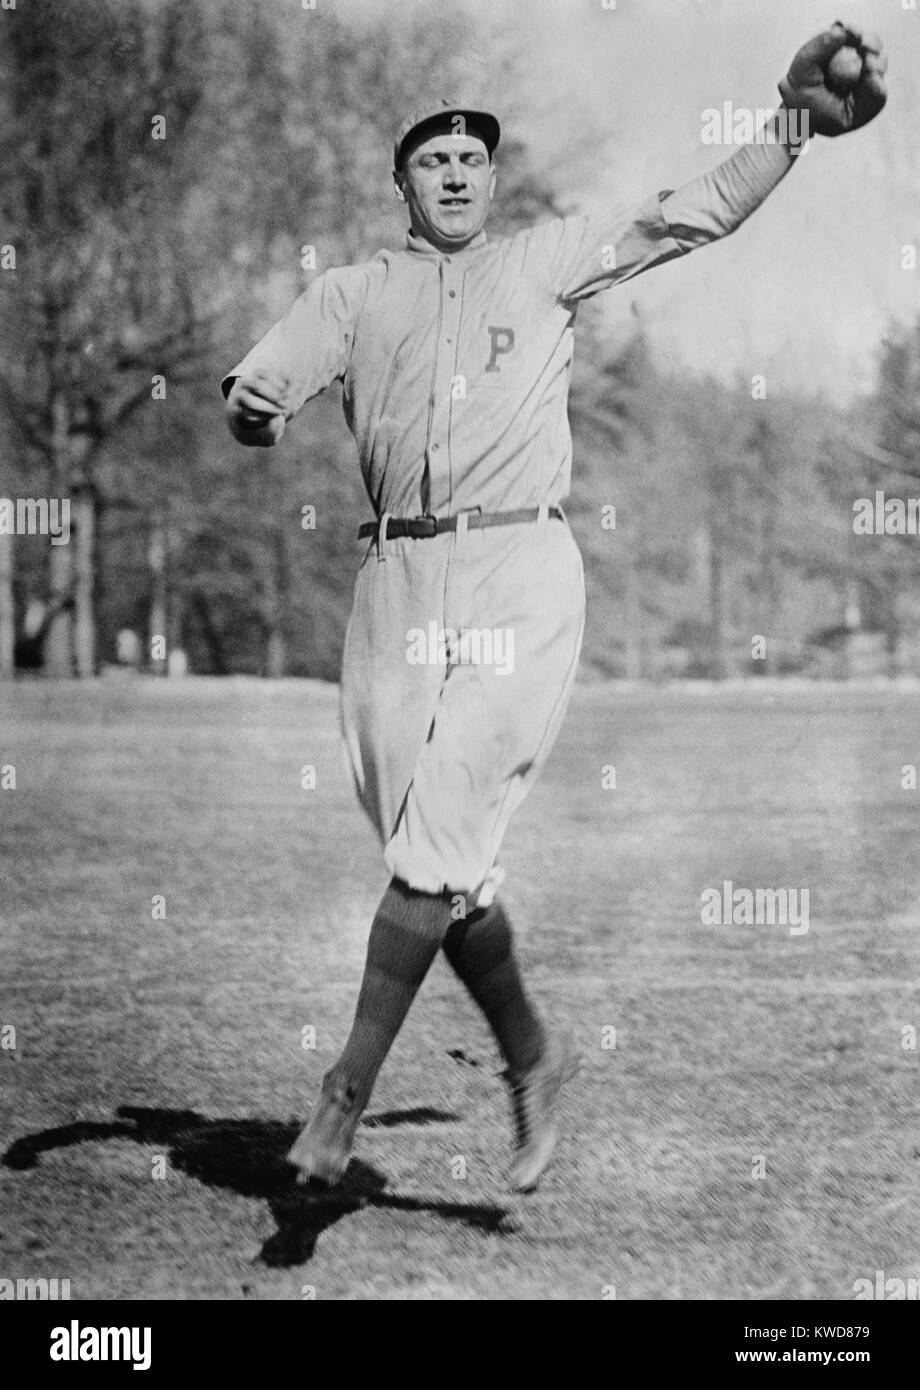 Pittsburgh Pirate third baseman Harold 'Pie' Traynor making a jumping catch of a baseball in 1920. He played his entire Major League career from 1920-37 with the Pirates. (BSLOC 2015 17 14) Stock Photo